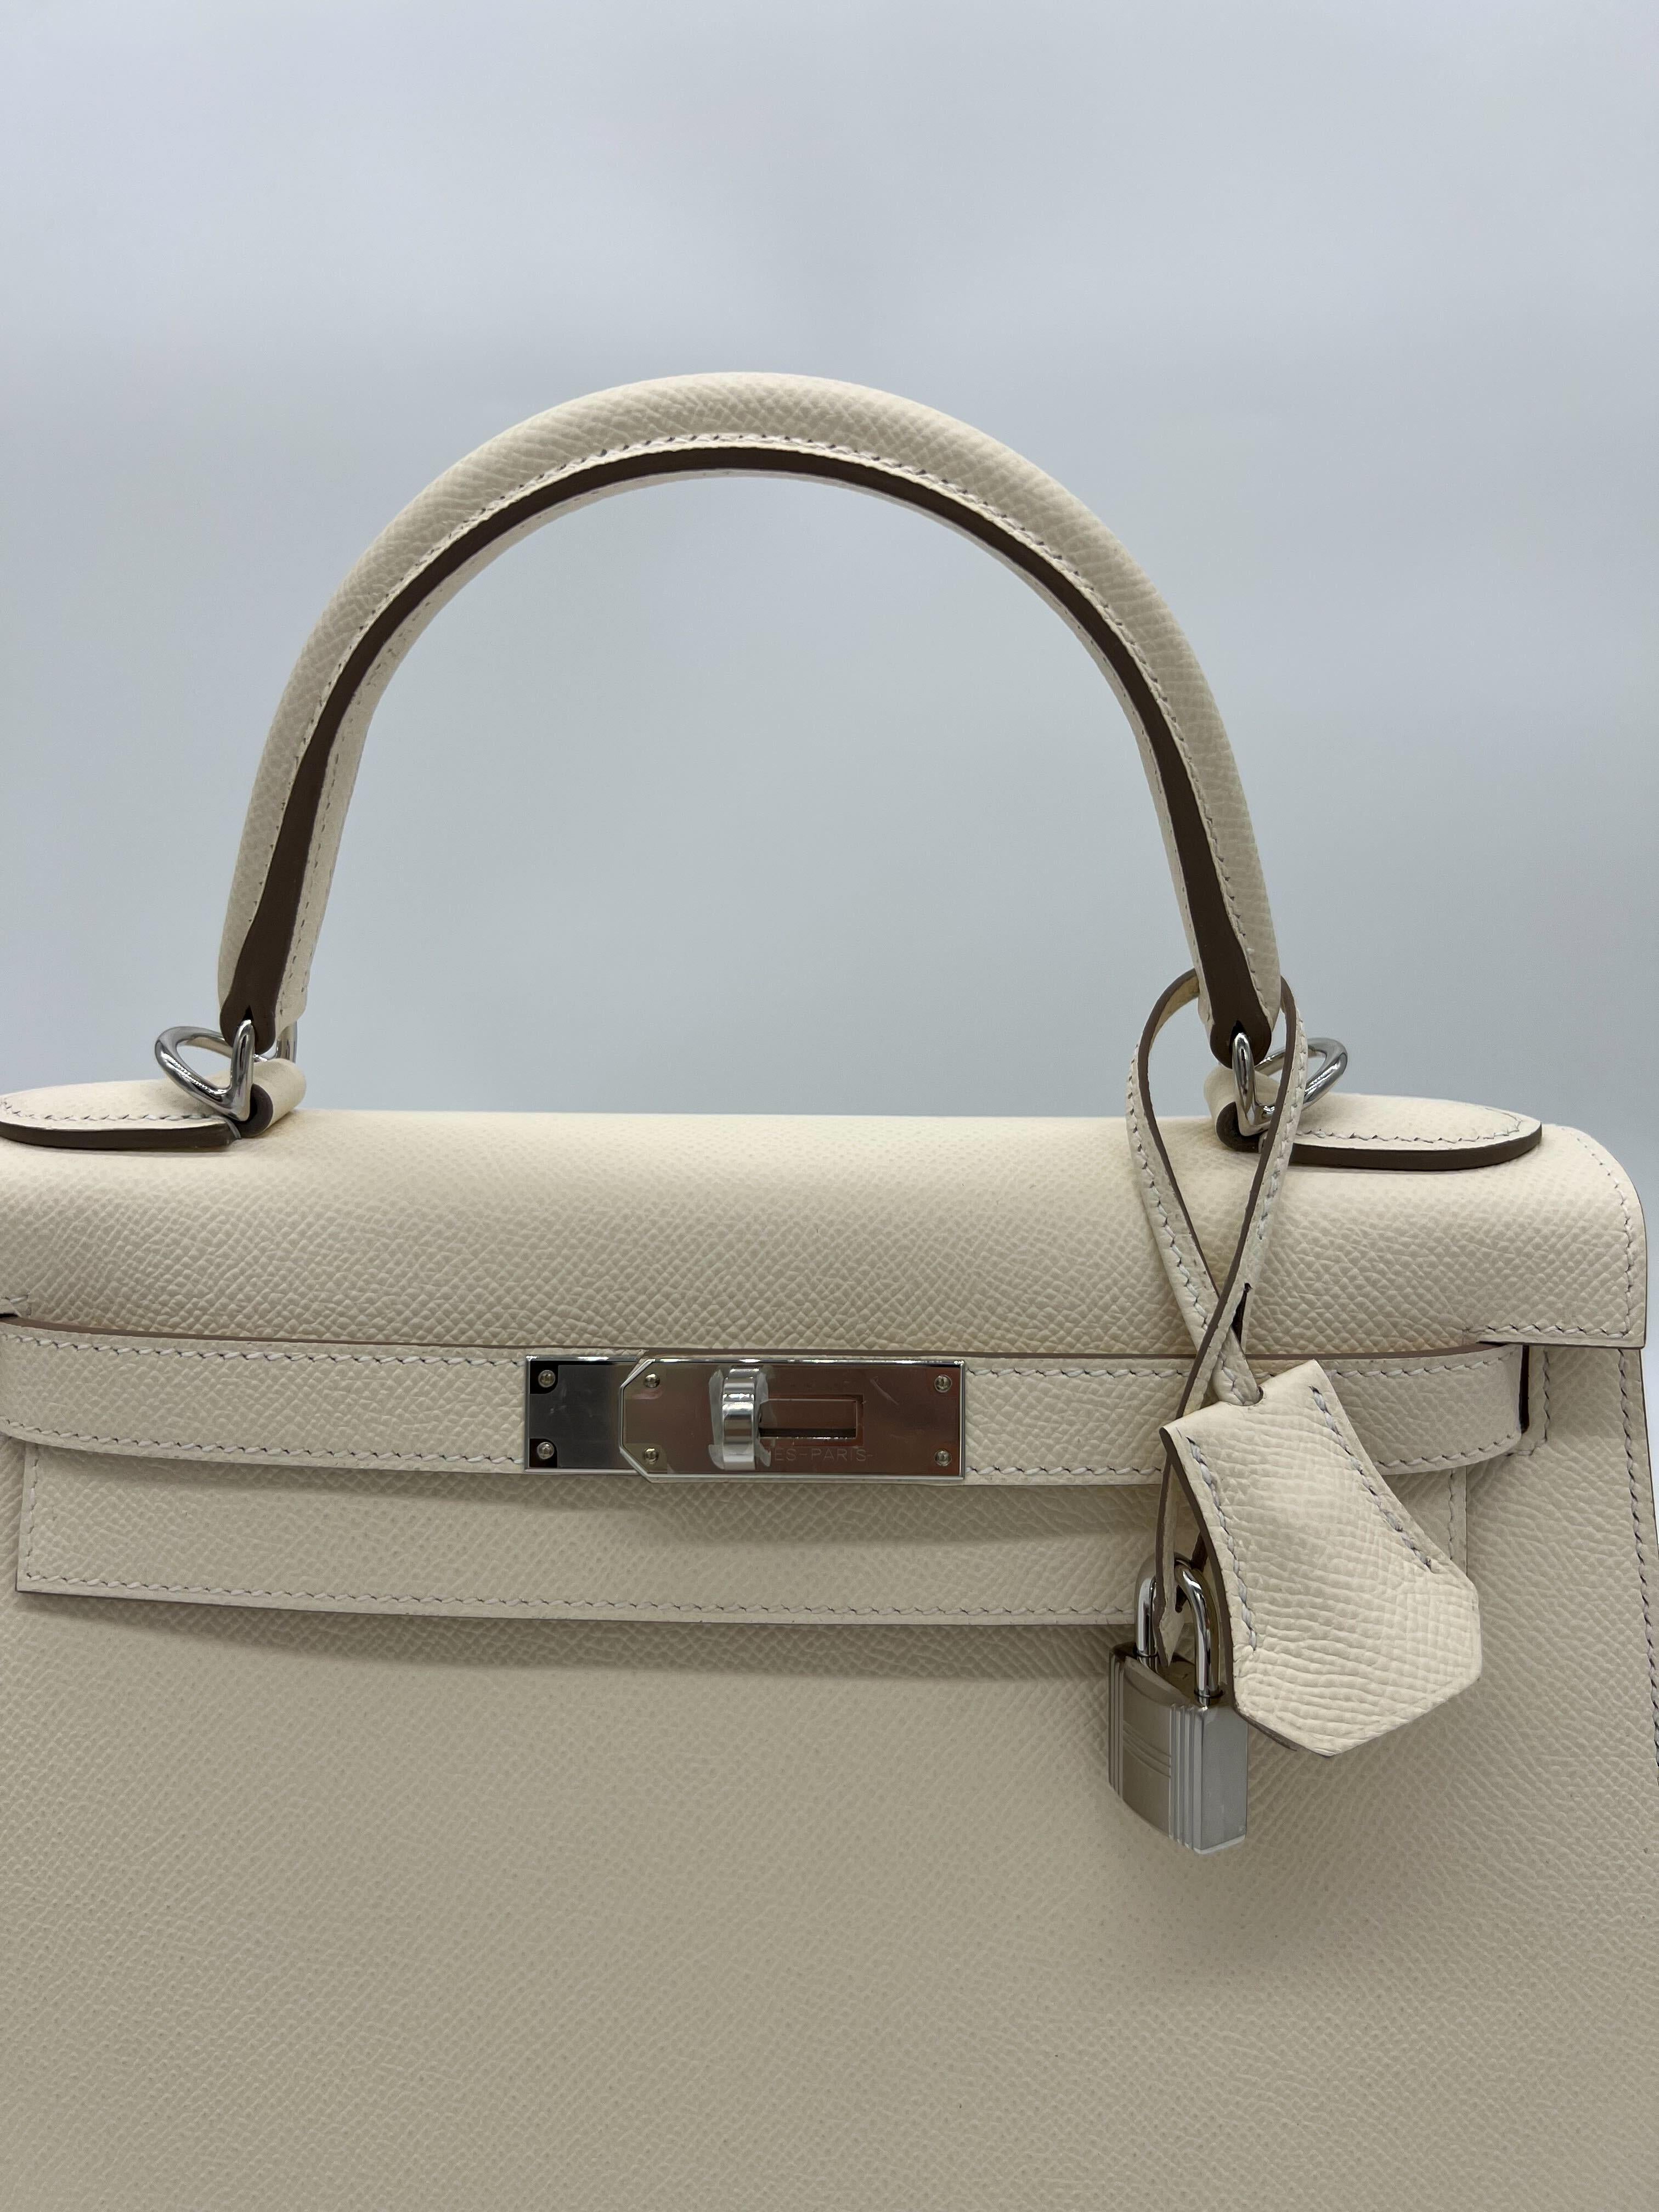 Hermes Kelly 28 Nata Epsom Palladium Hardware In New Condition For Sale In New York, NY